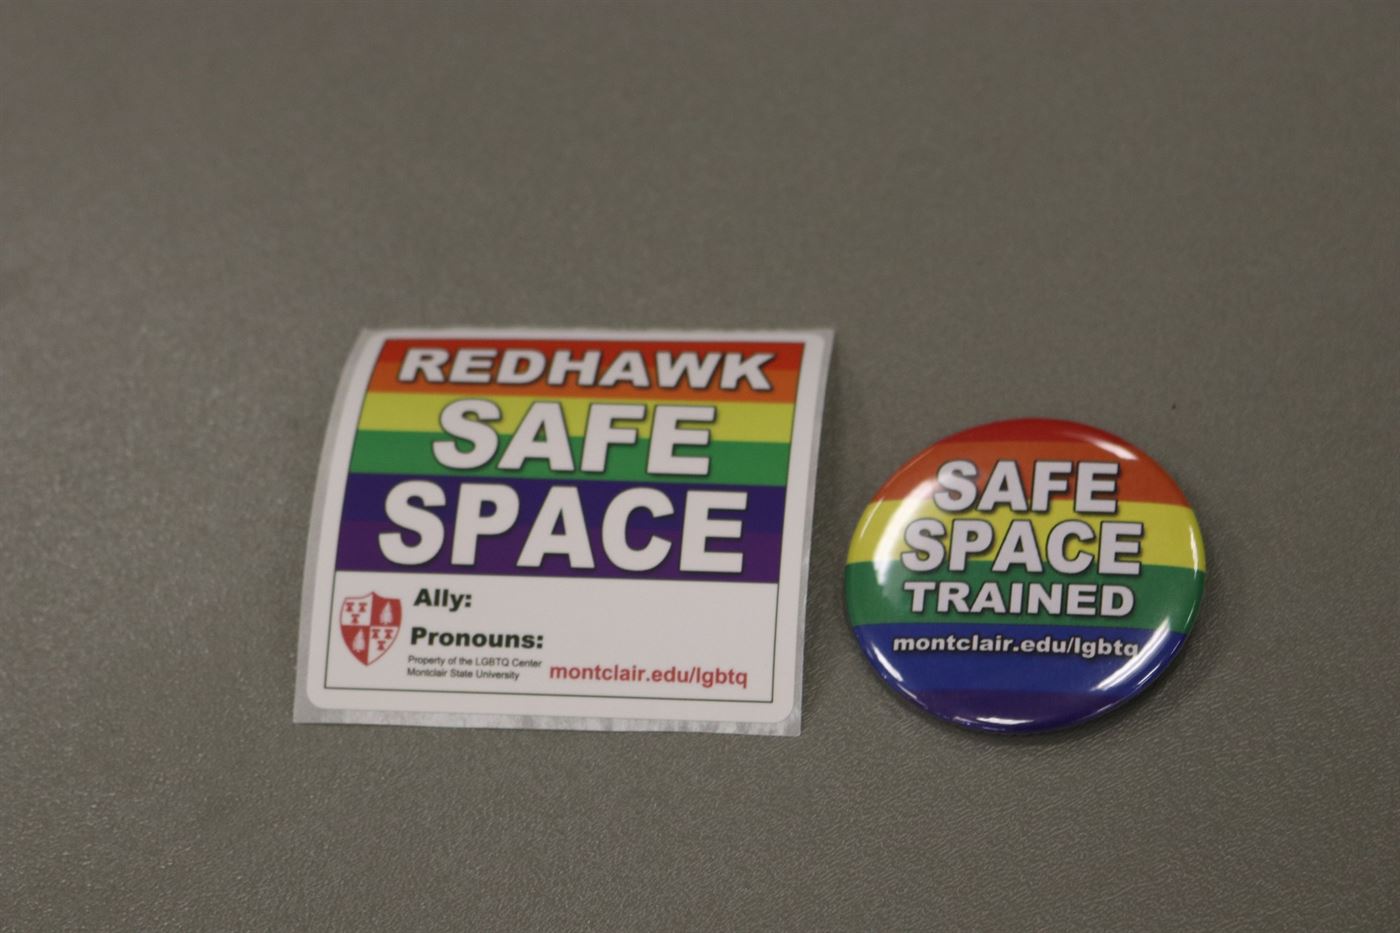 The sticker and pin attendees received after the Safe Space training was complete. Nicole Comly | The Montclarion